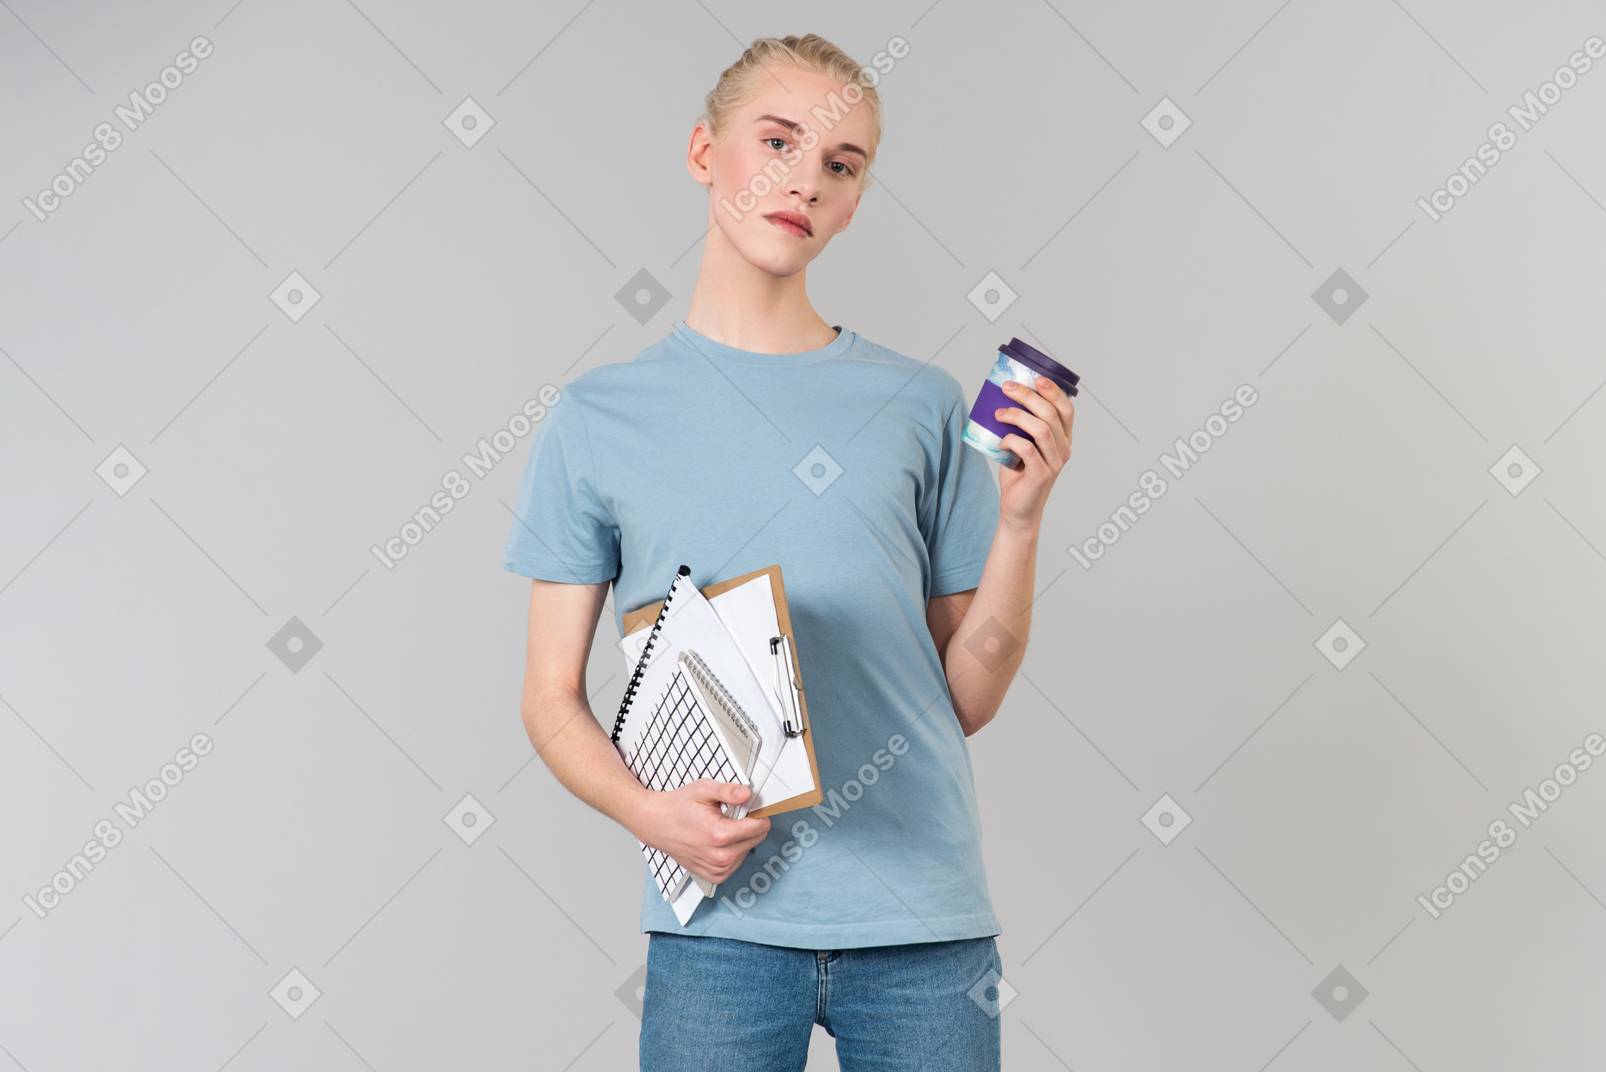 Cute young androgynous guy in a light blue t-shirt and blue jeans, on his way to college